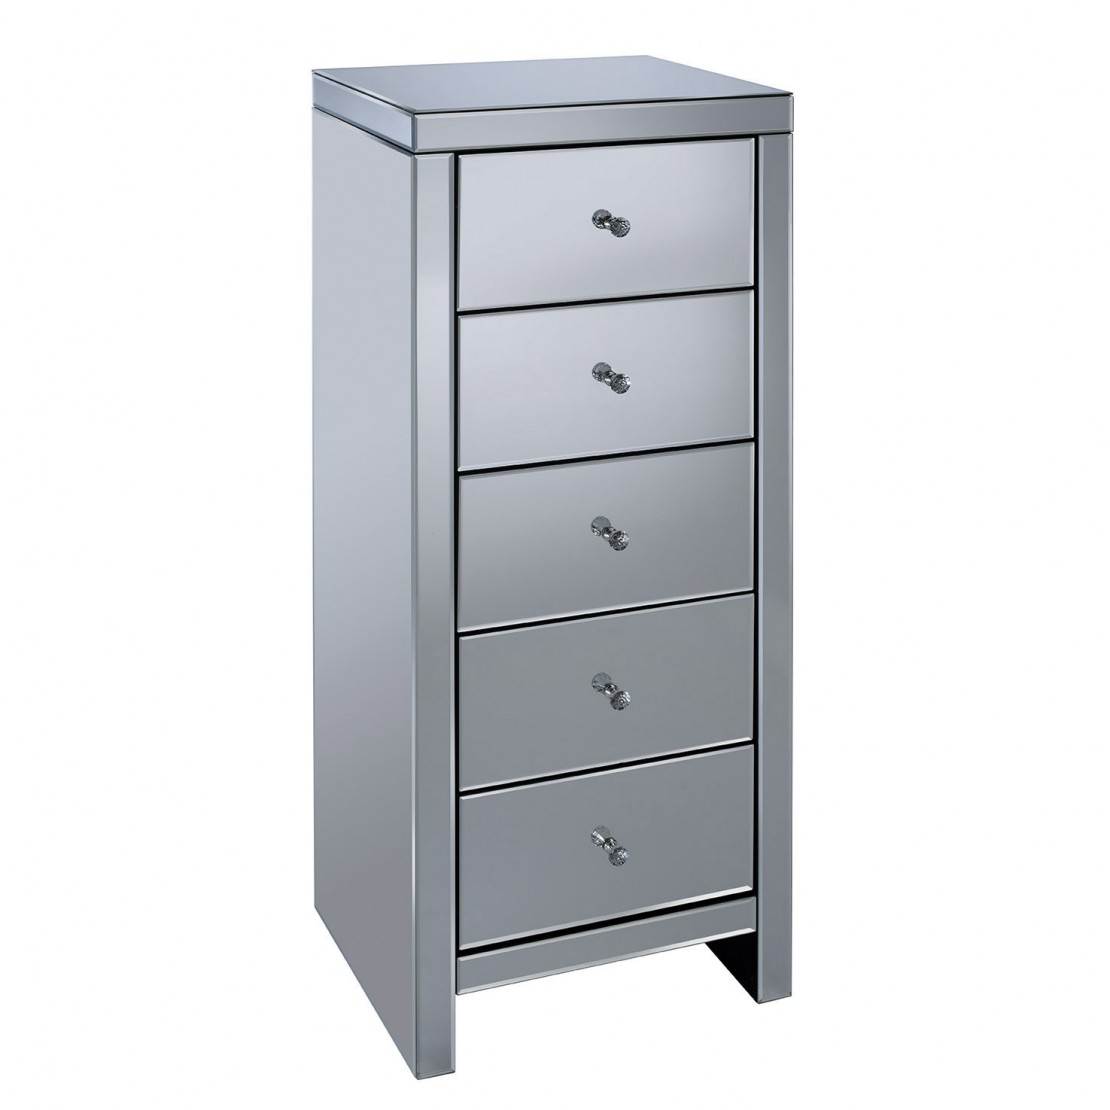 /_images/product-photos/birlea-seville-5-drawer-narrow-chest-a.jpg